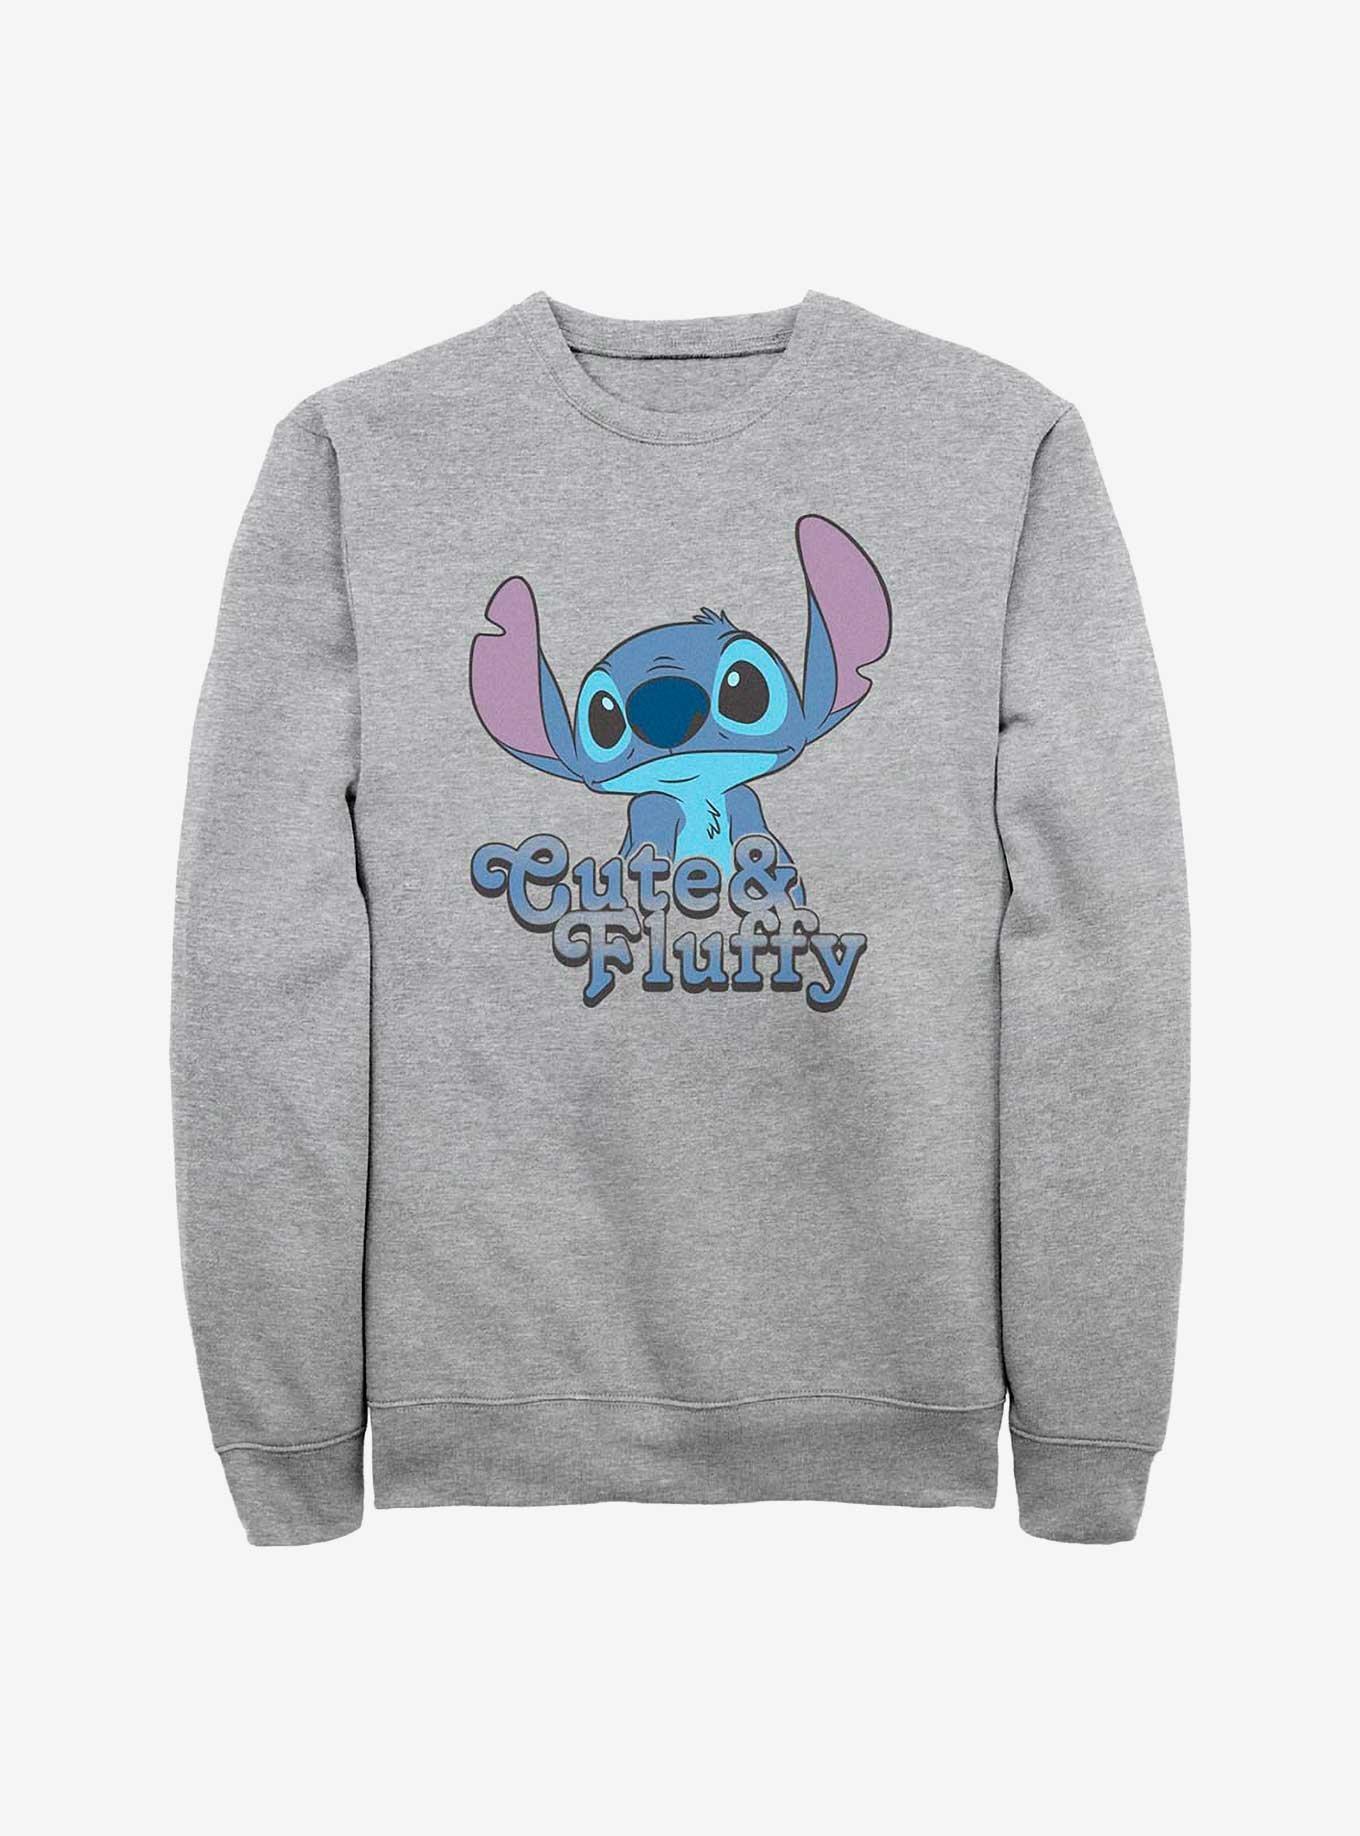 they put all the fluffy pixar characters on one sweater